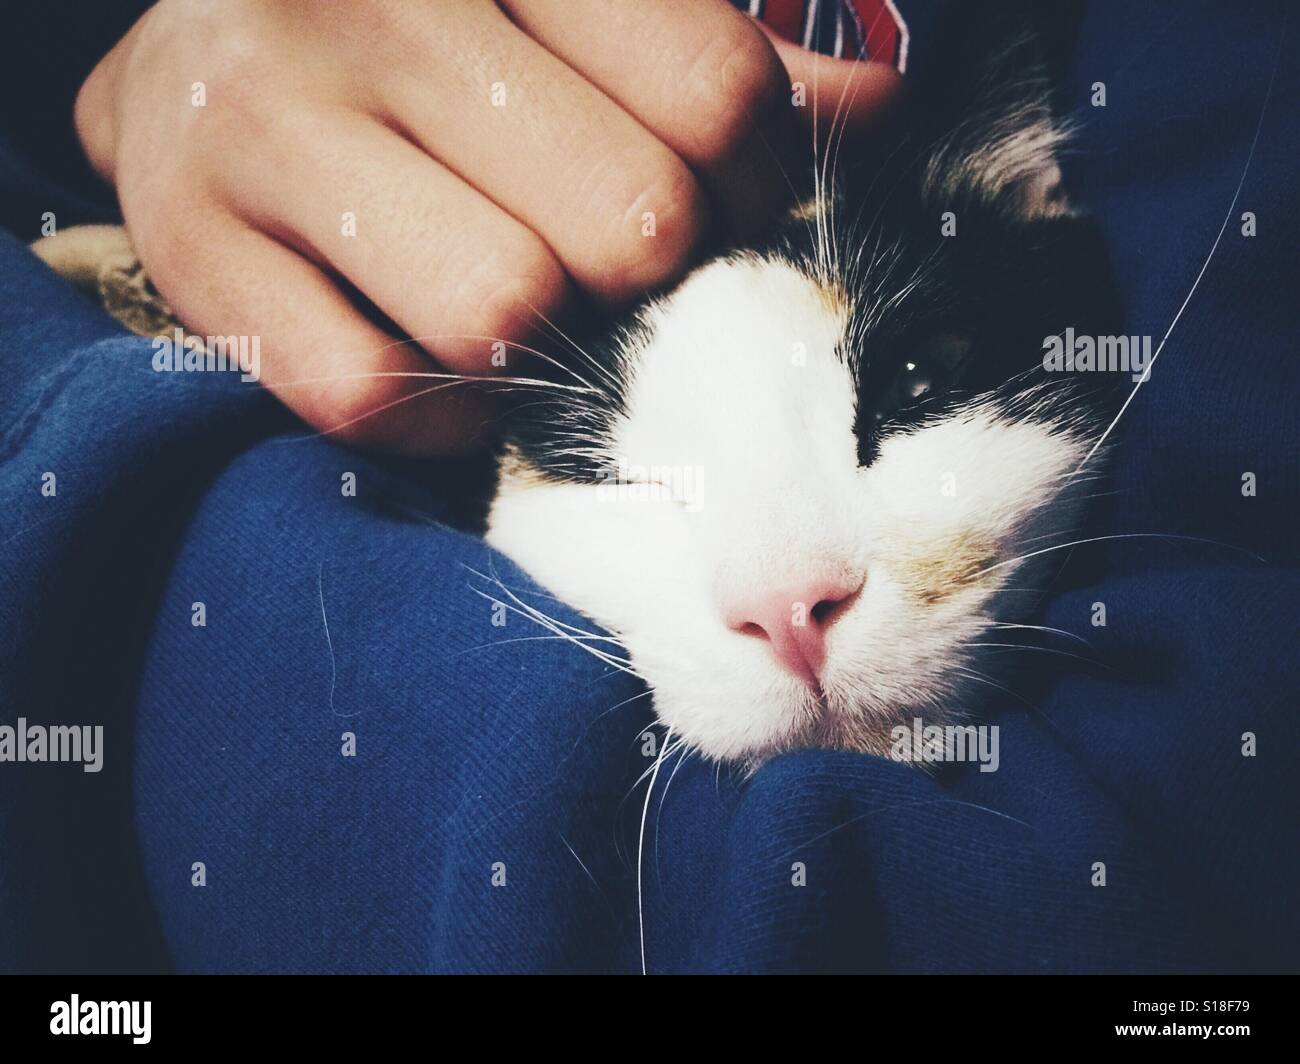 Cat on teenager's arms. Stock Photo